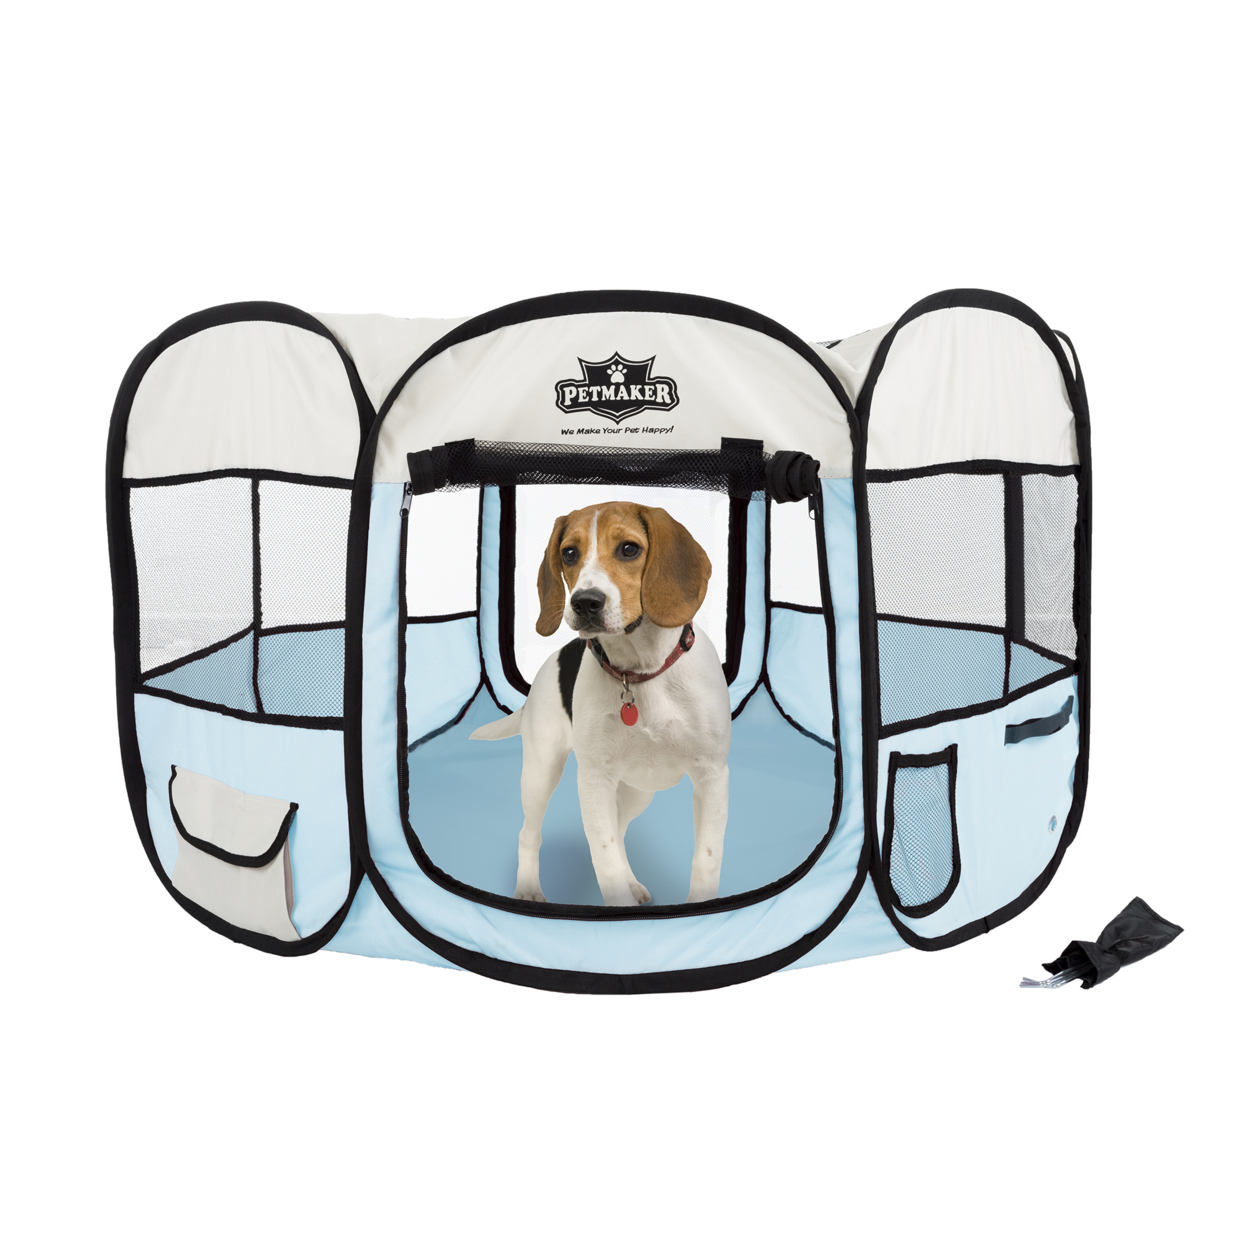 Portable Pop Up Pet Play Pen With Carrying Bag 38in Diameter 24in Blue By PETMAKER